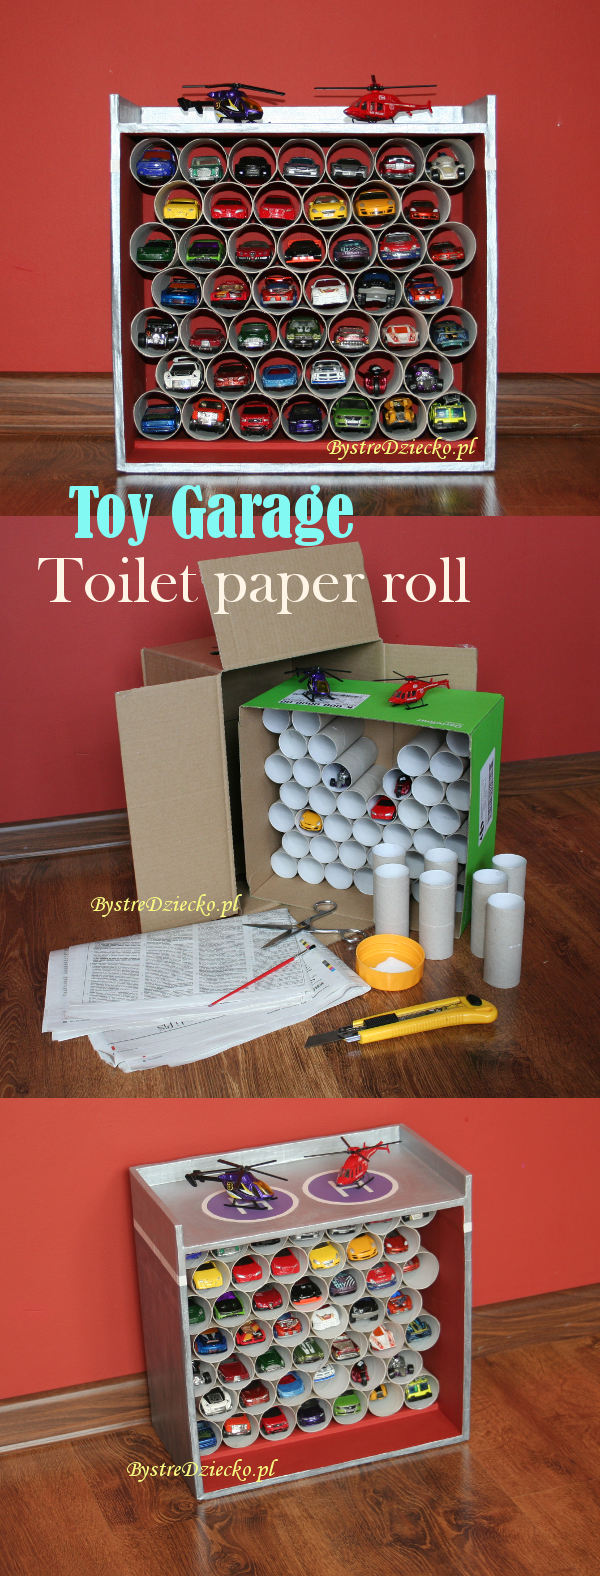 DIY toy garage made from toilet paper rolls and cardboard boxes – toilet paper roll crafts for kids